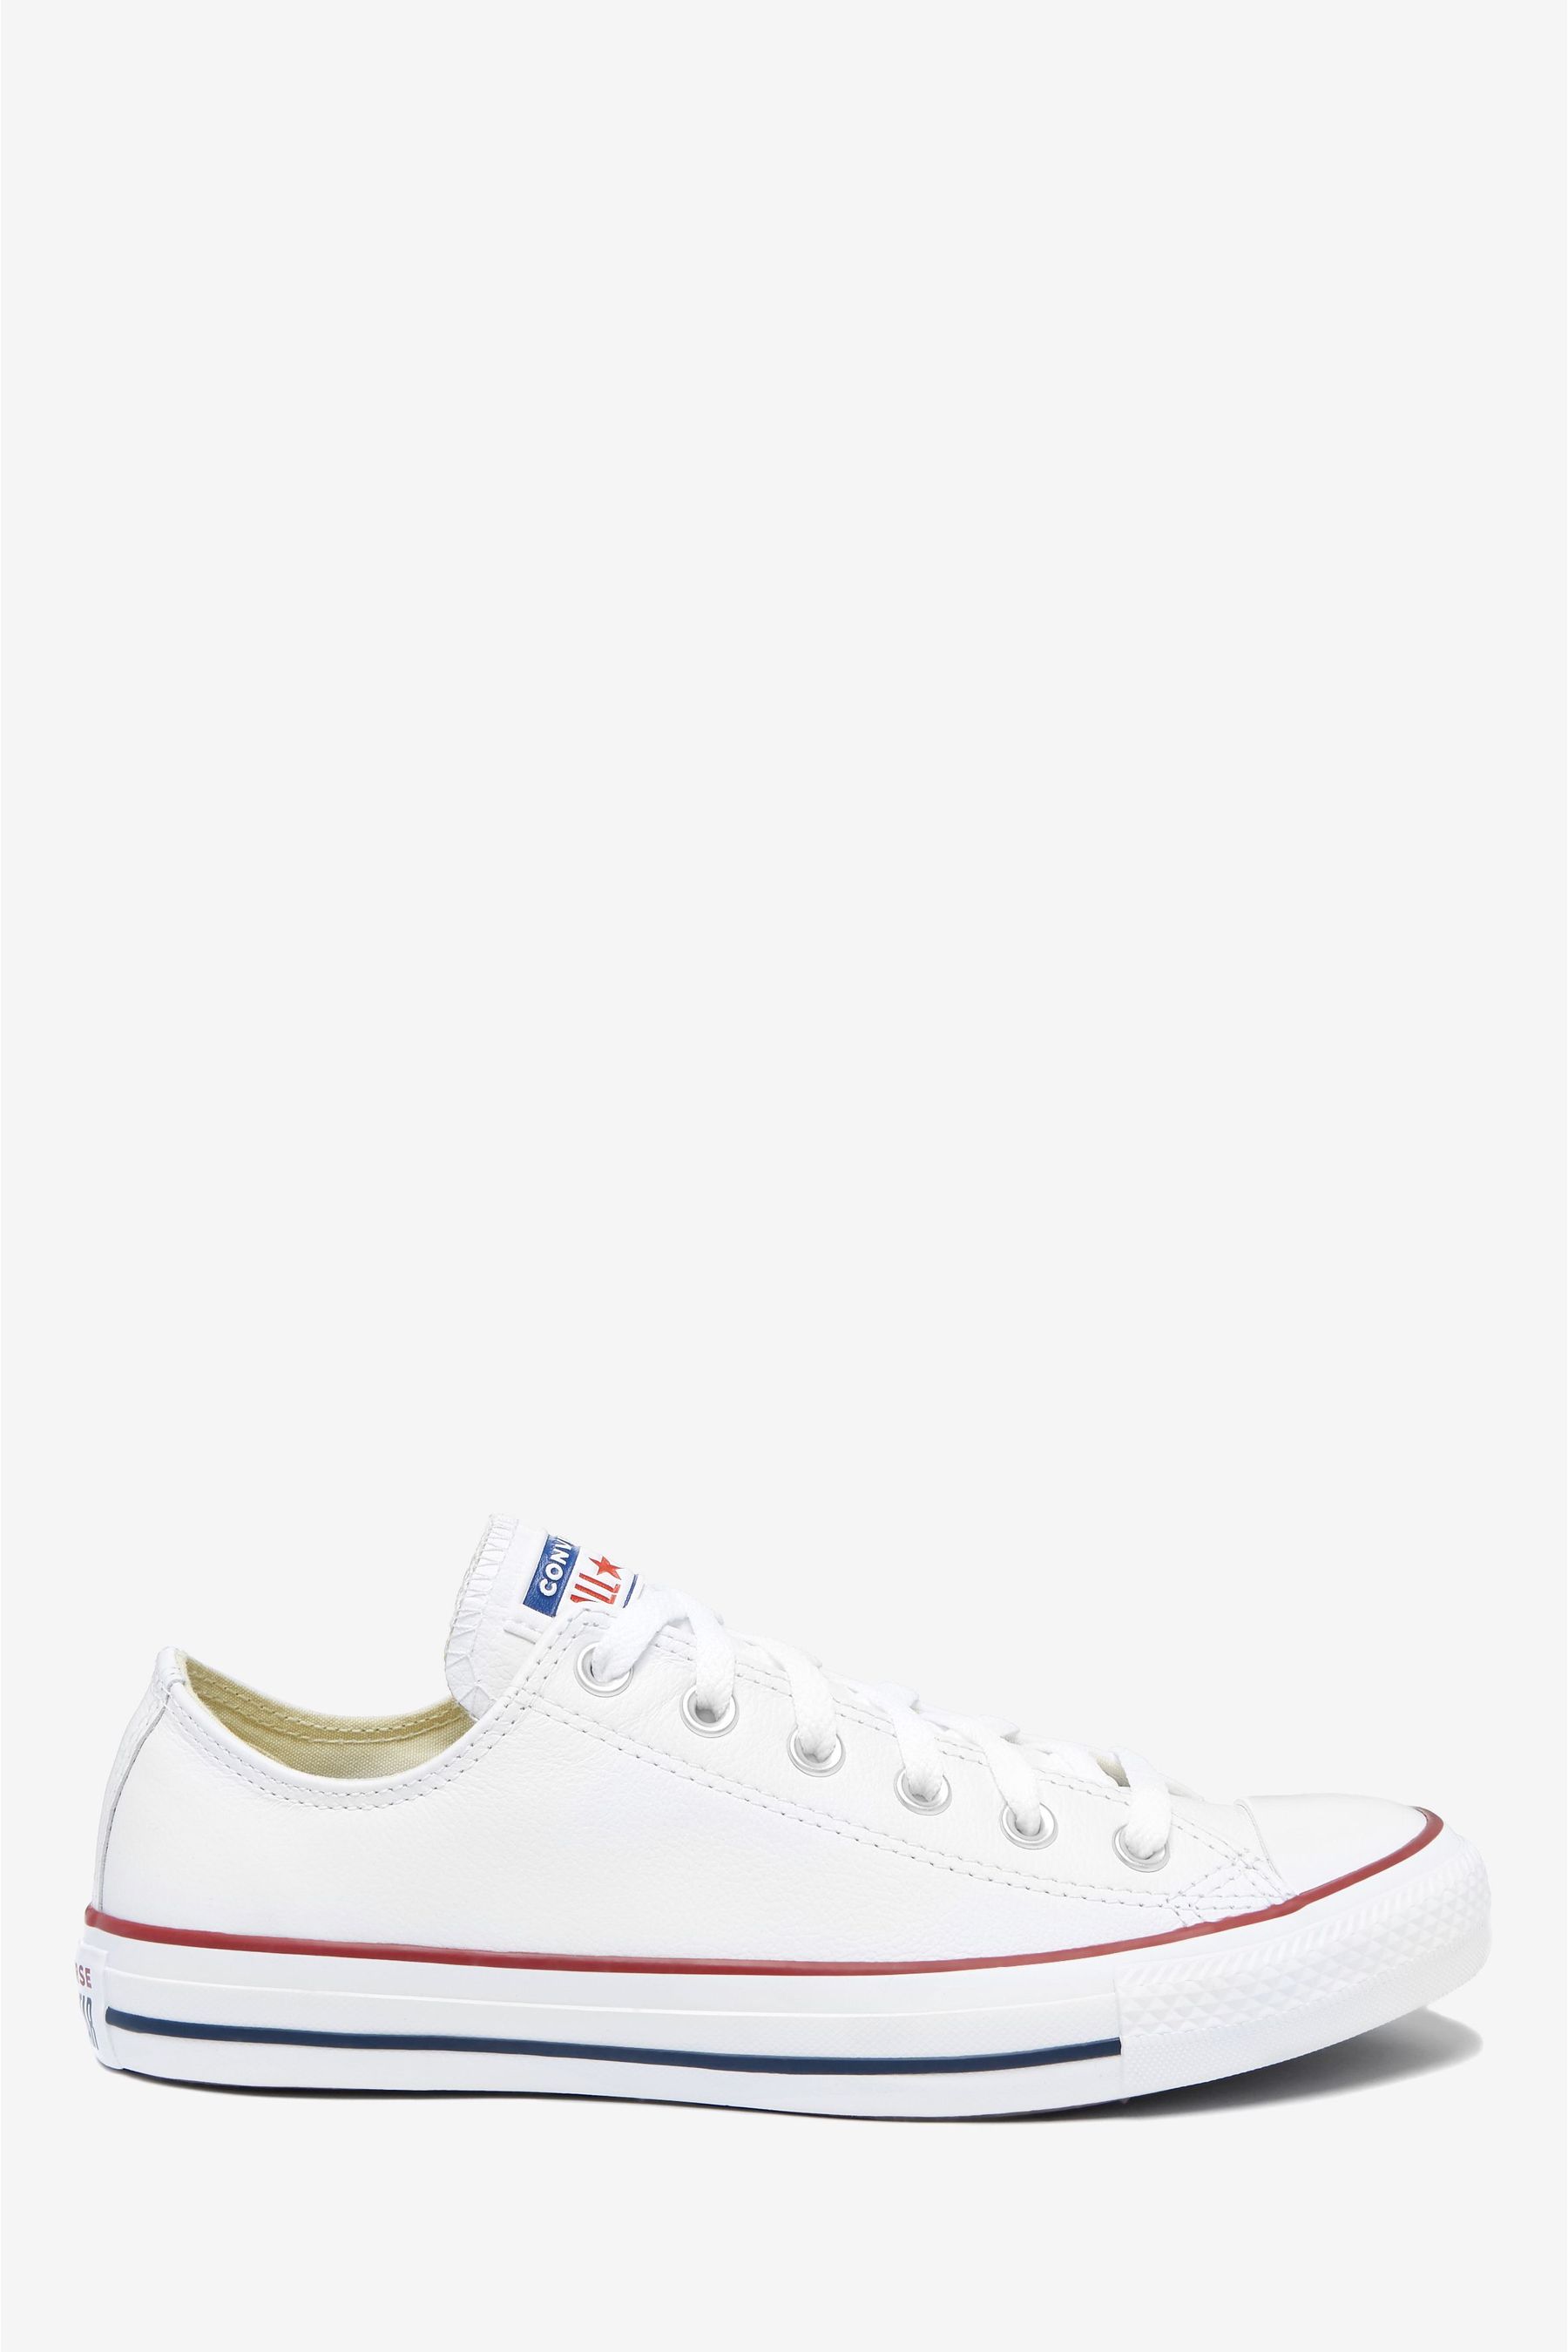 Buy Converse White Leather Ox Trainers from the Next UK online shop